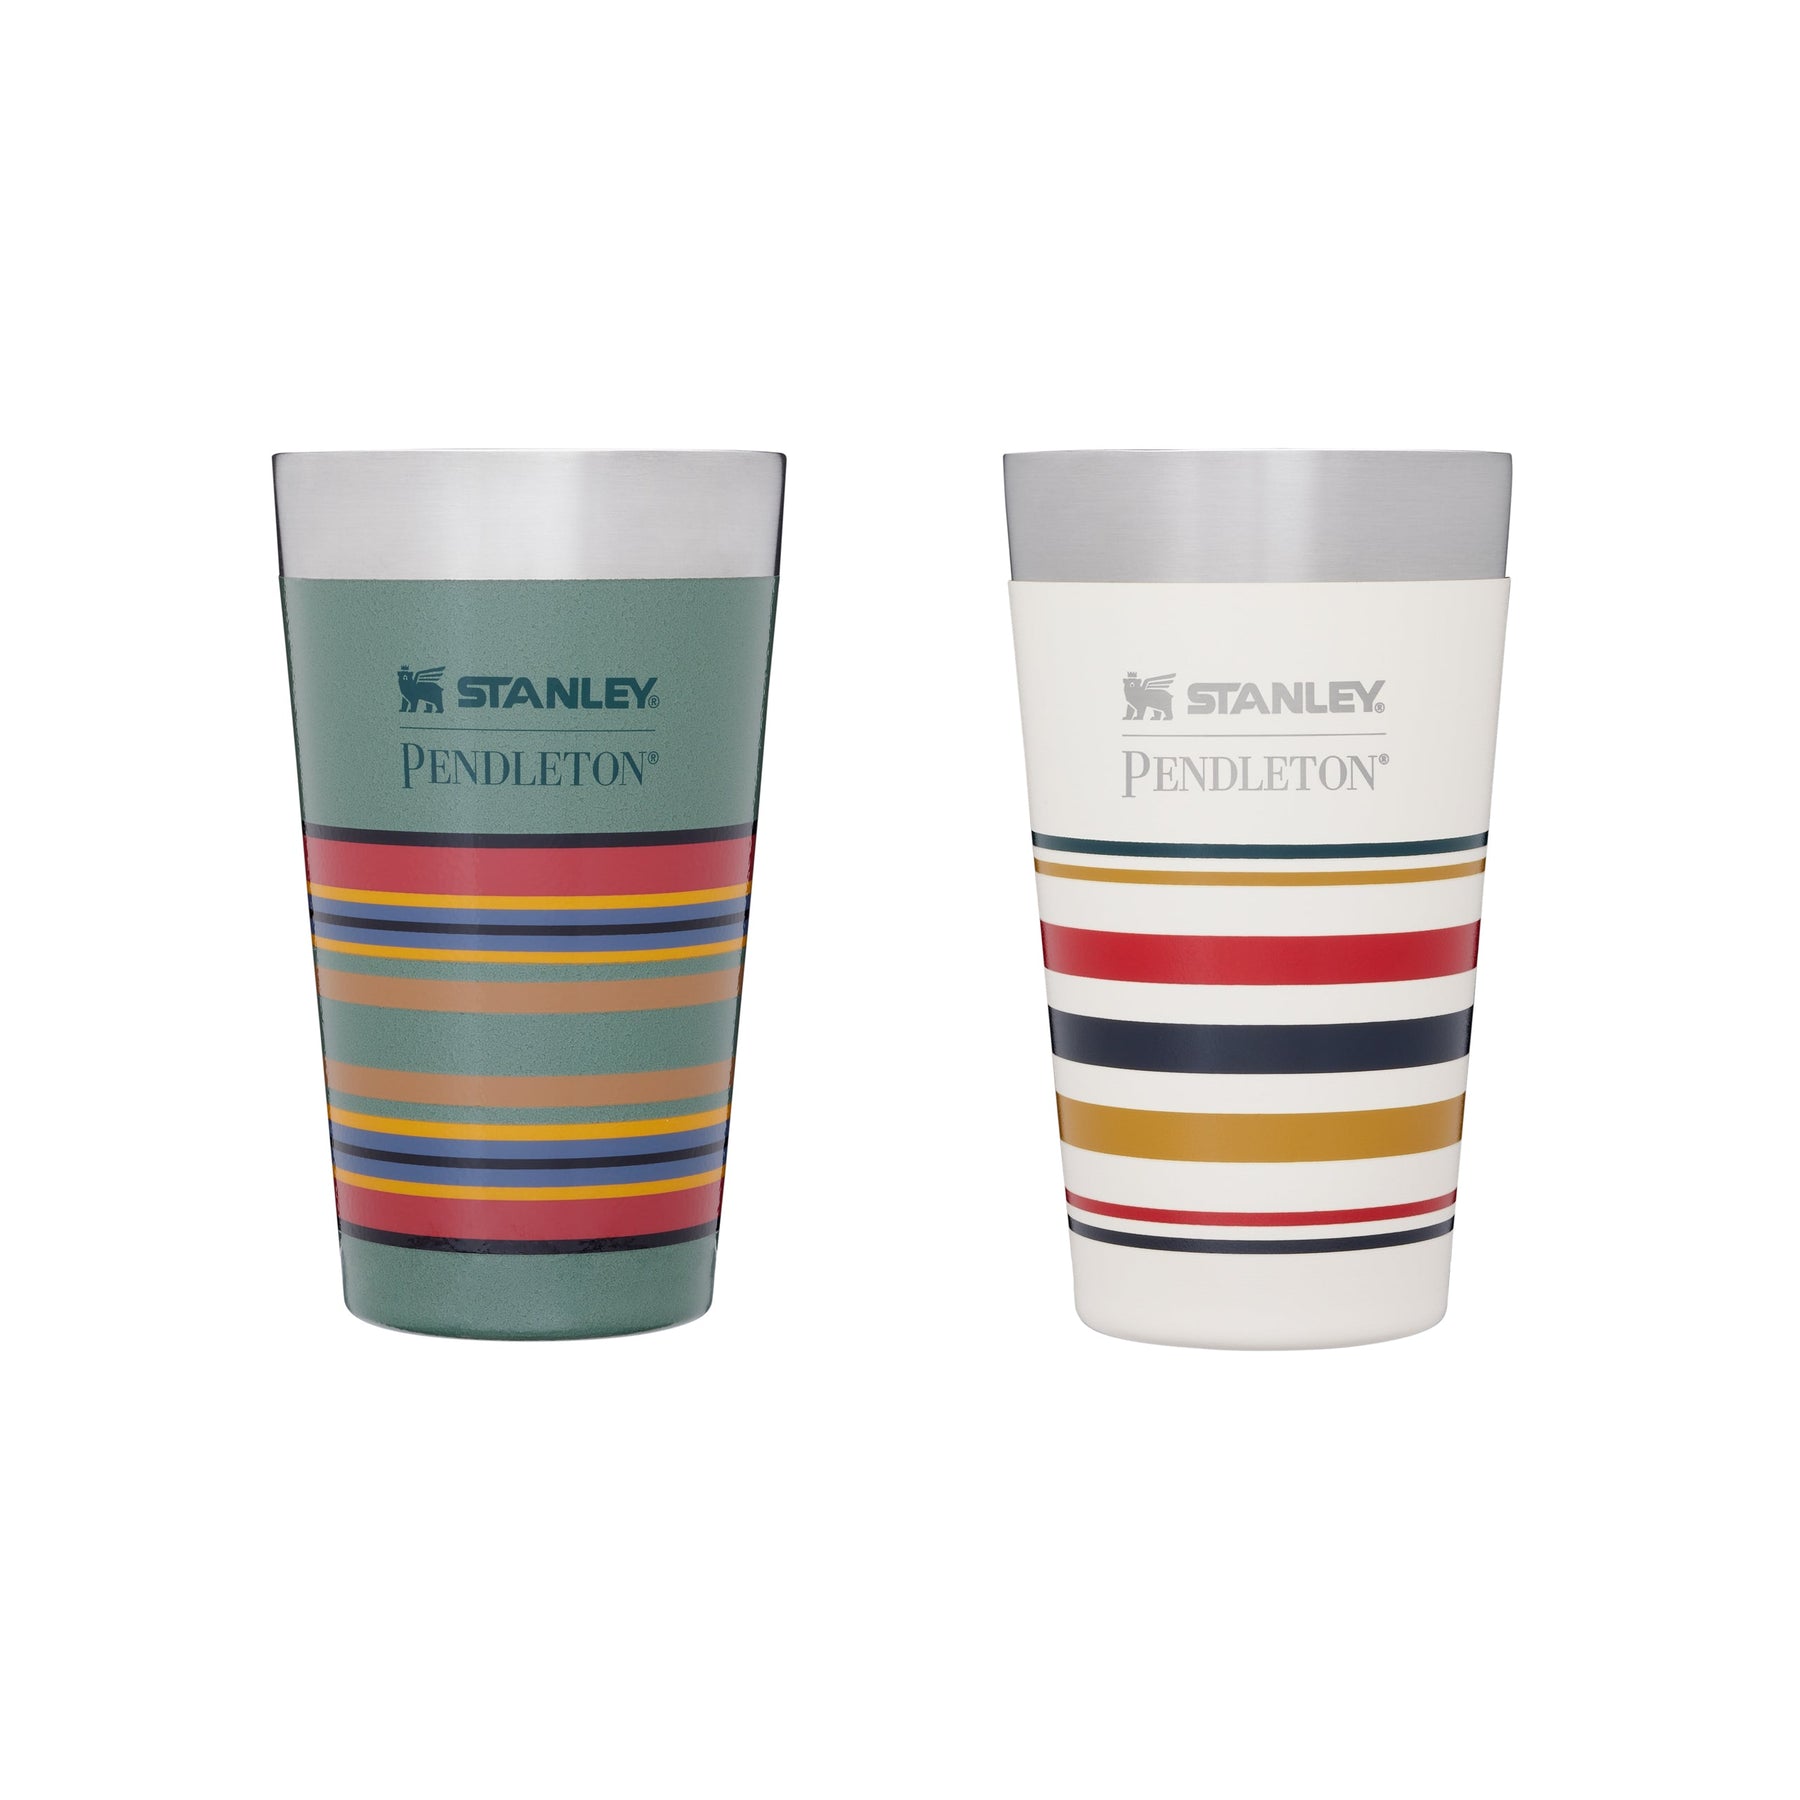 Pendleton 20oz Stainless Steel Hot/Cold Tumblers Cups - Set of  2: Tumblers & Water Glasses